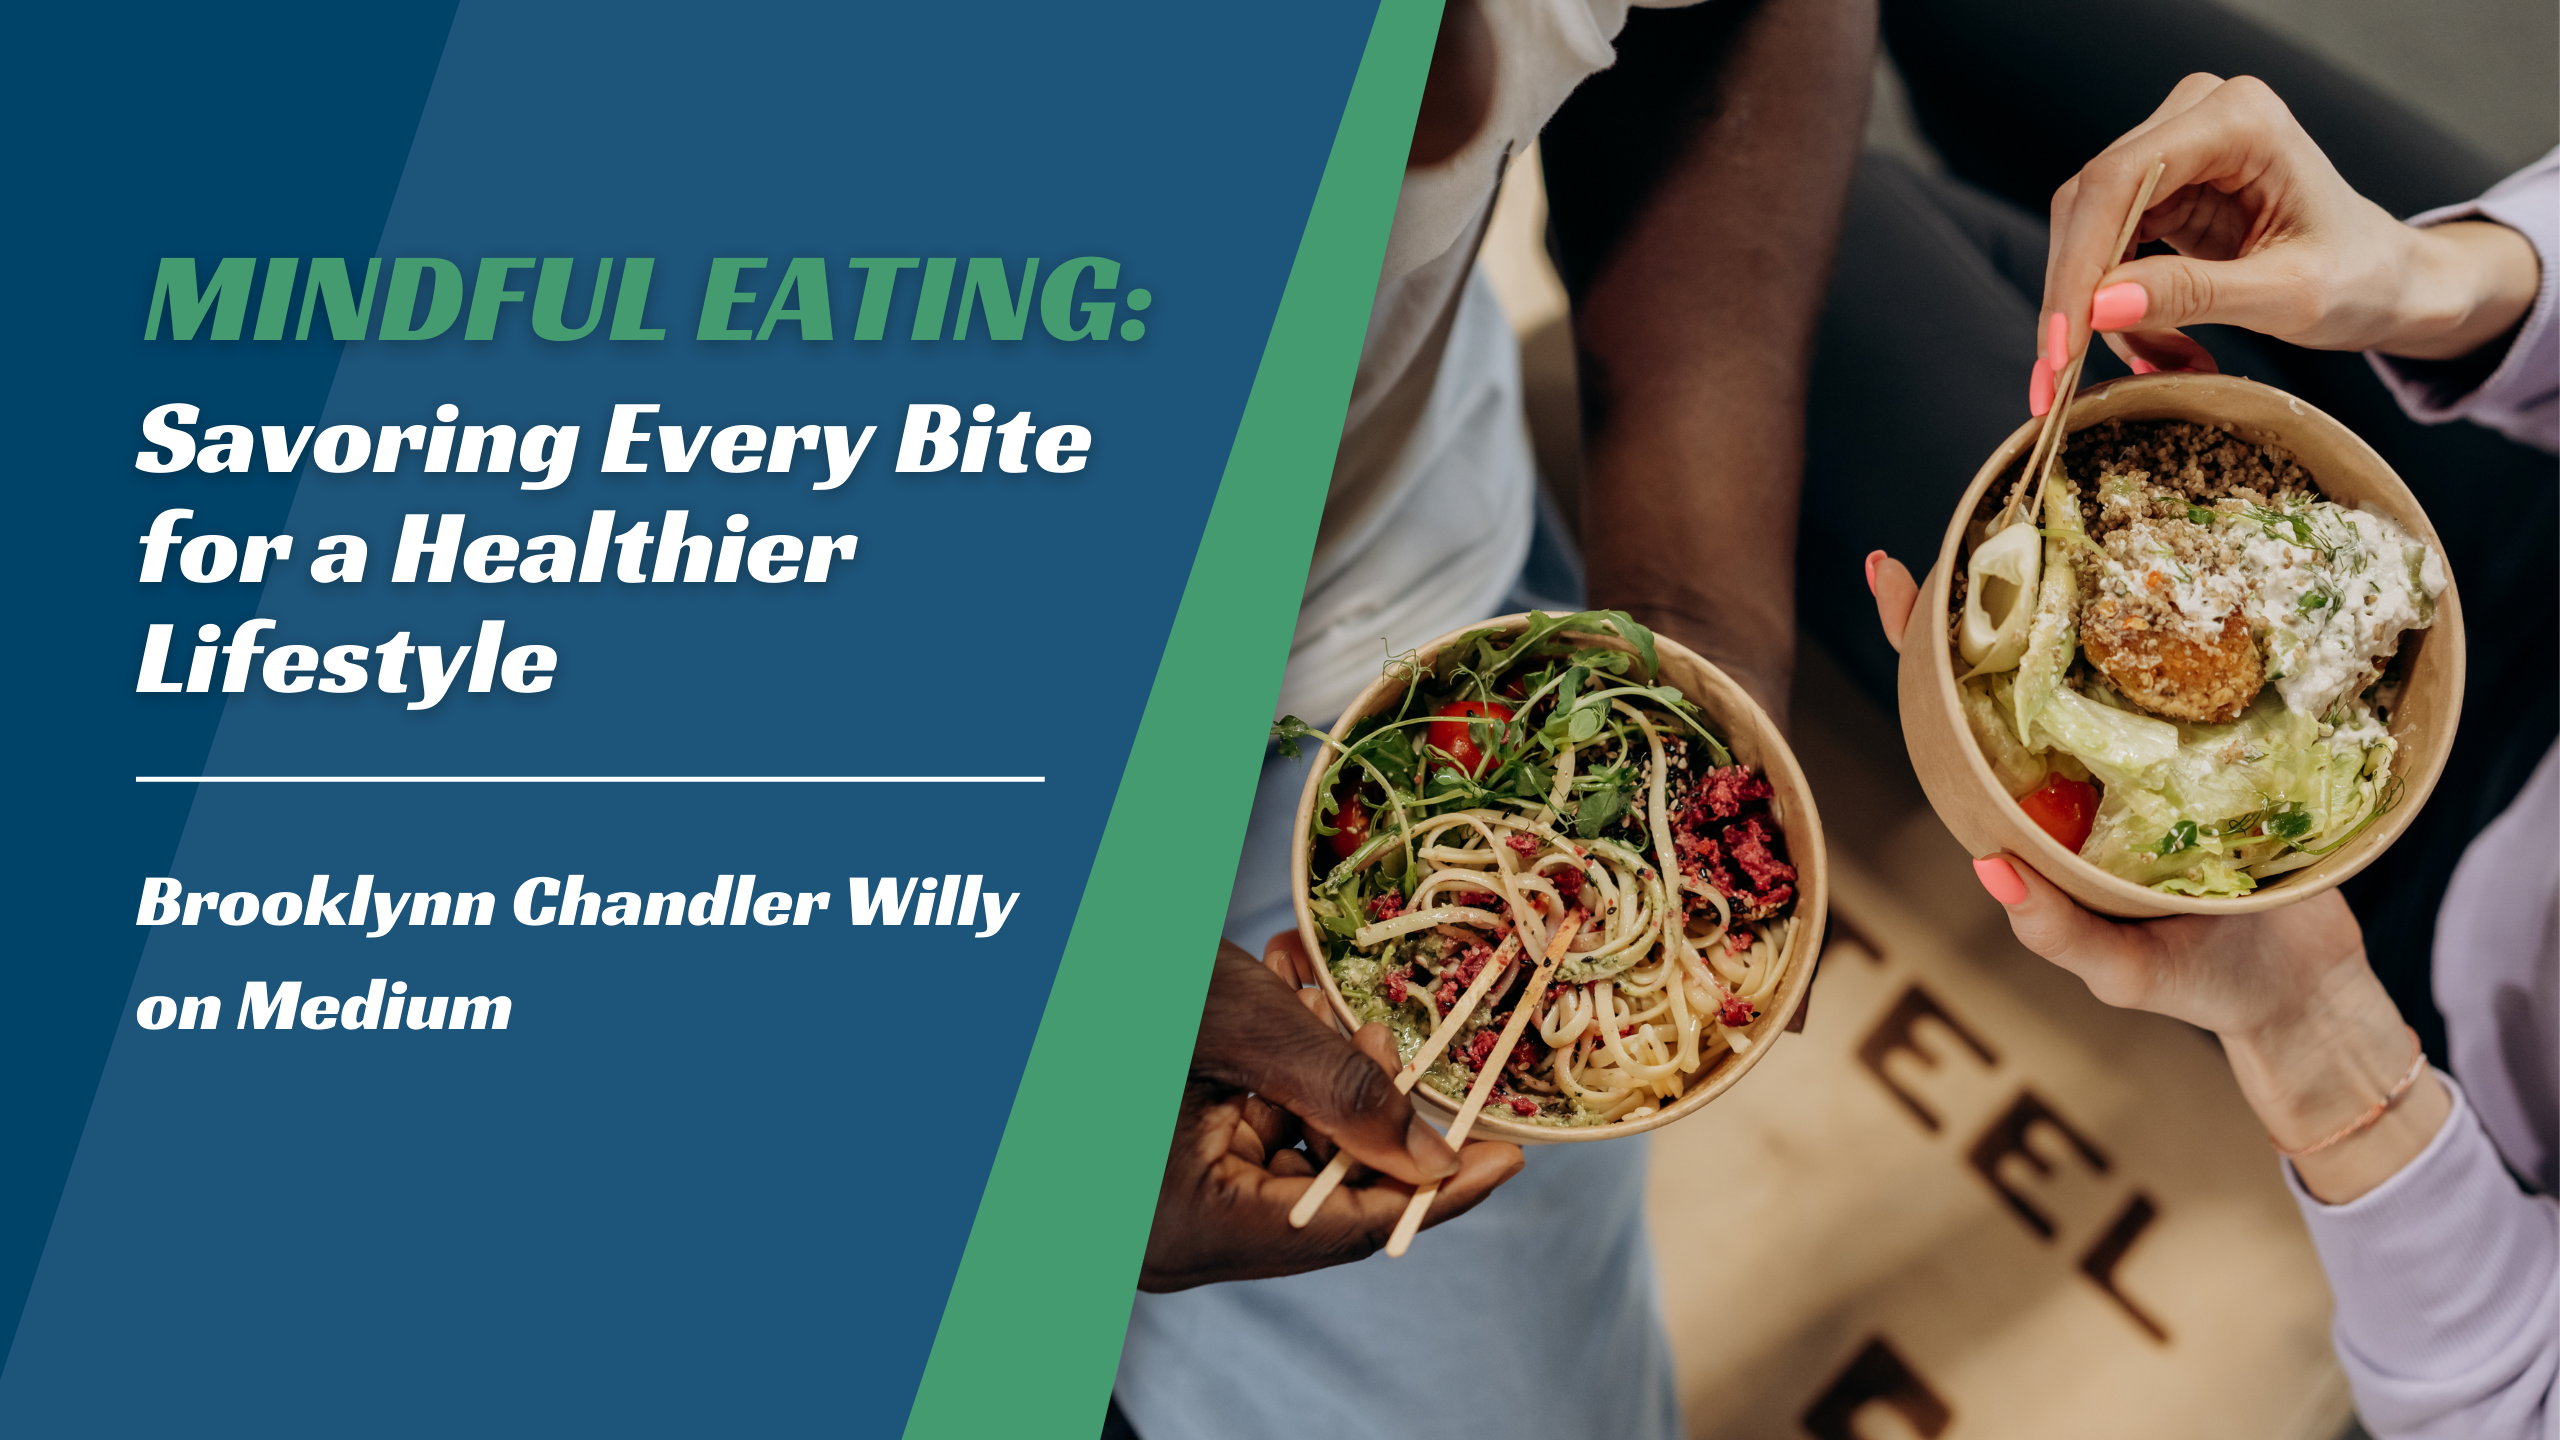 MINDFUL EATING:
Savoring Every Bite
for a Healthier
Lifestyle

Brooklynn Chandler Willy

on Medium